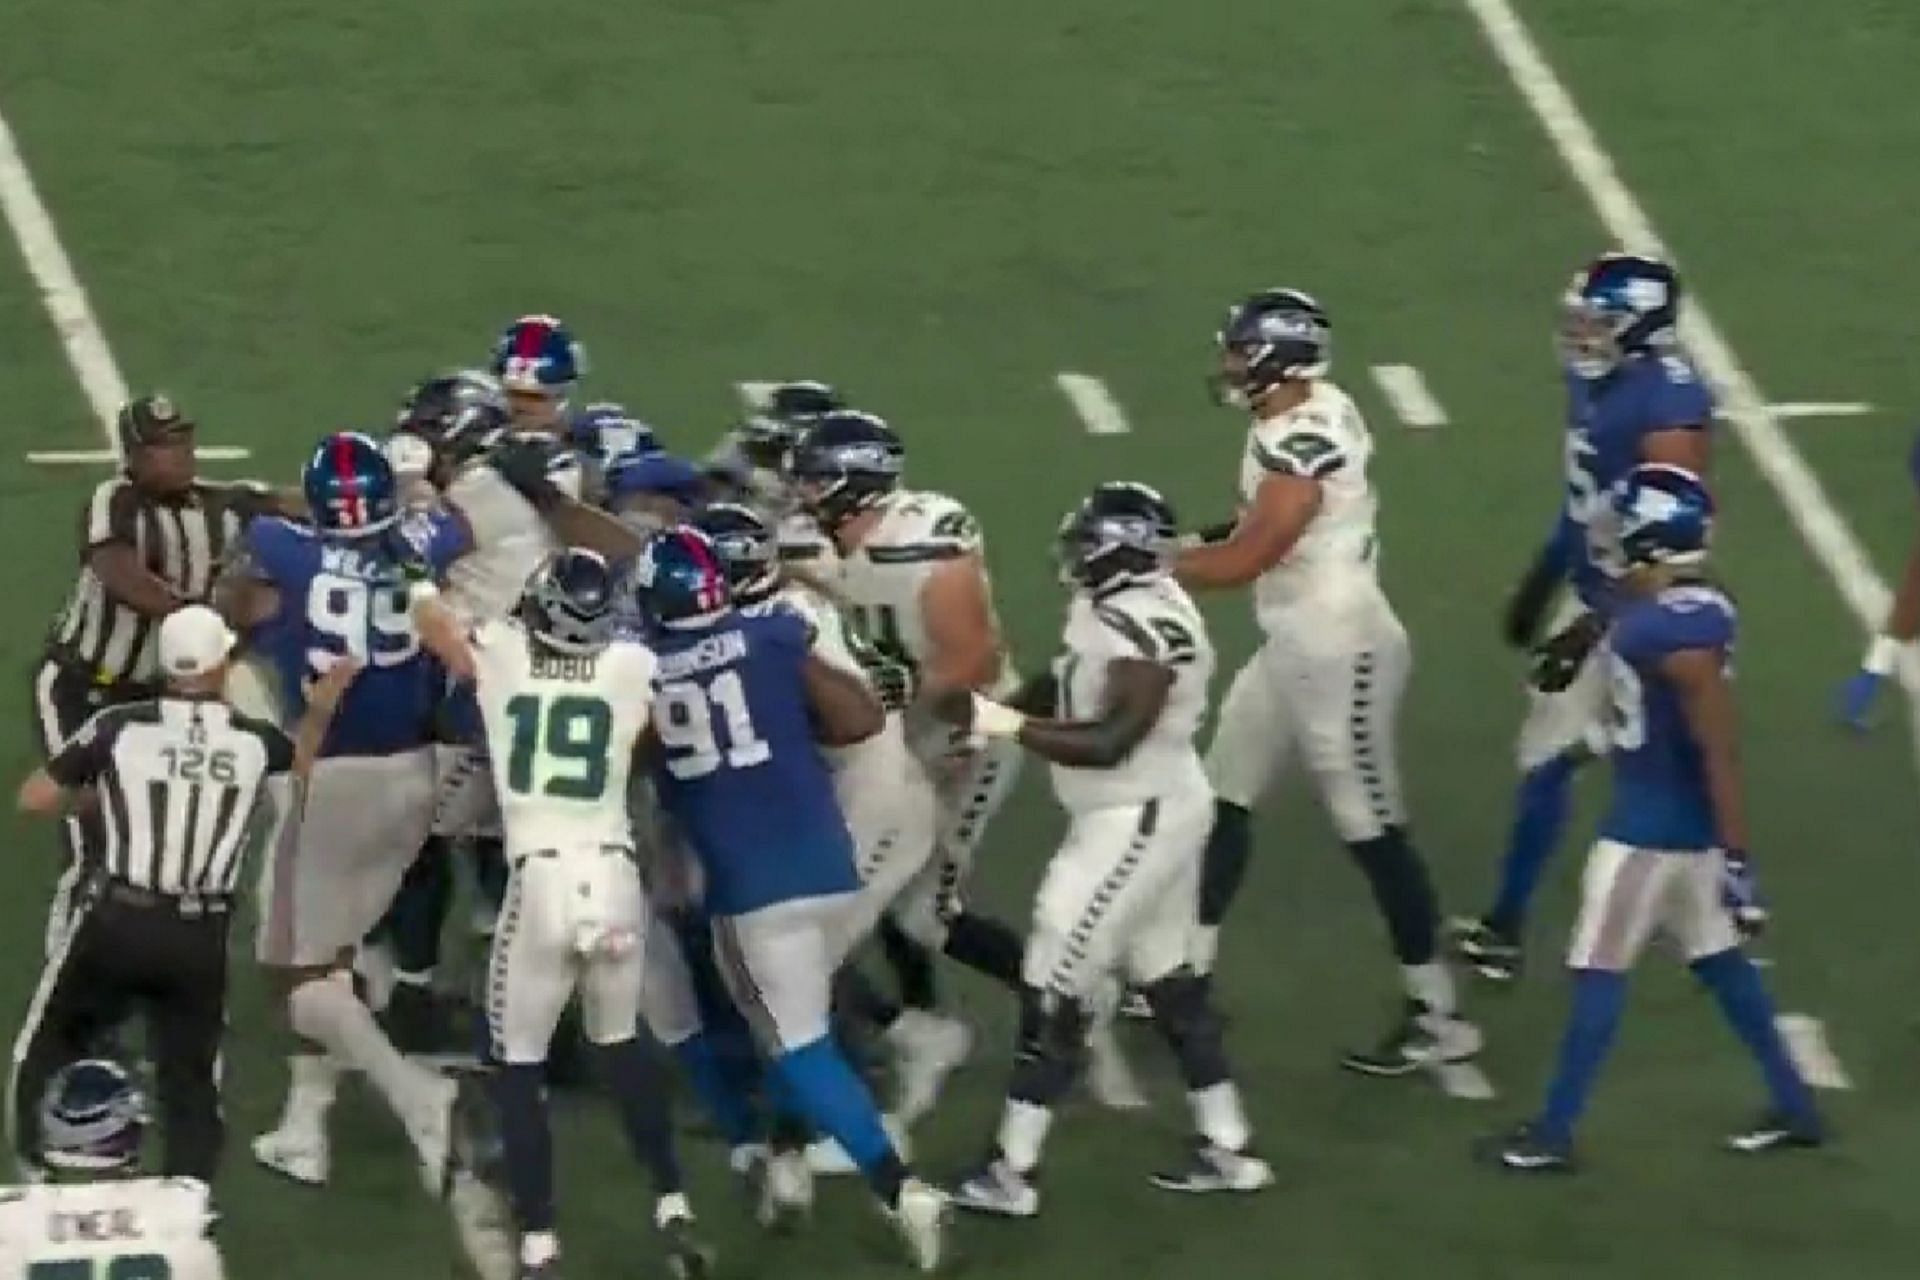 Massive fight breaks out between Giants and Seahawks during MNF showdown